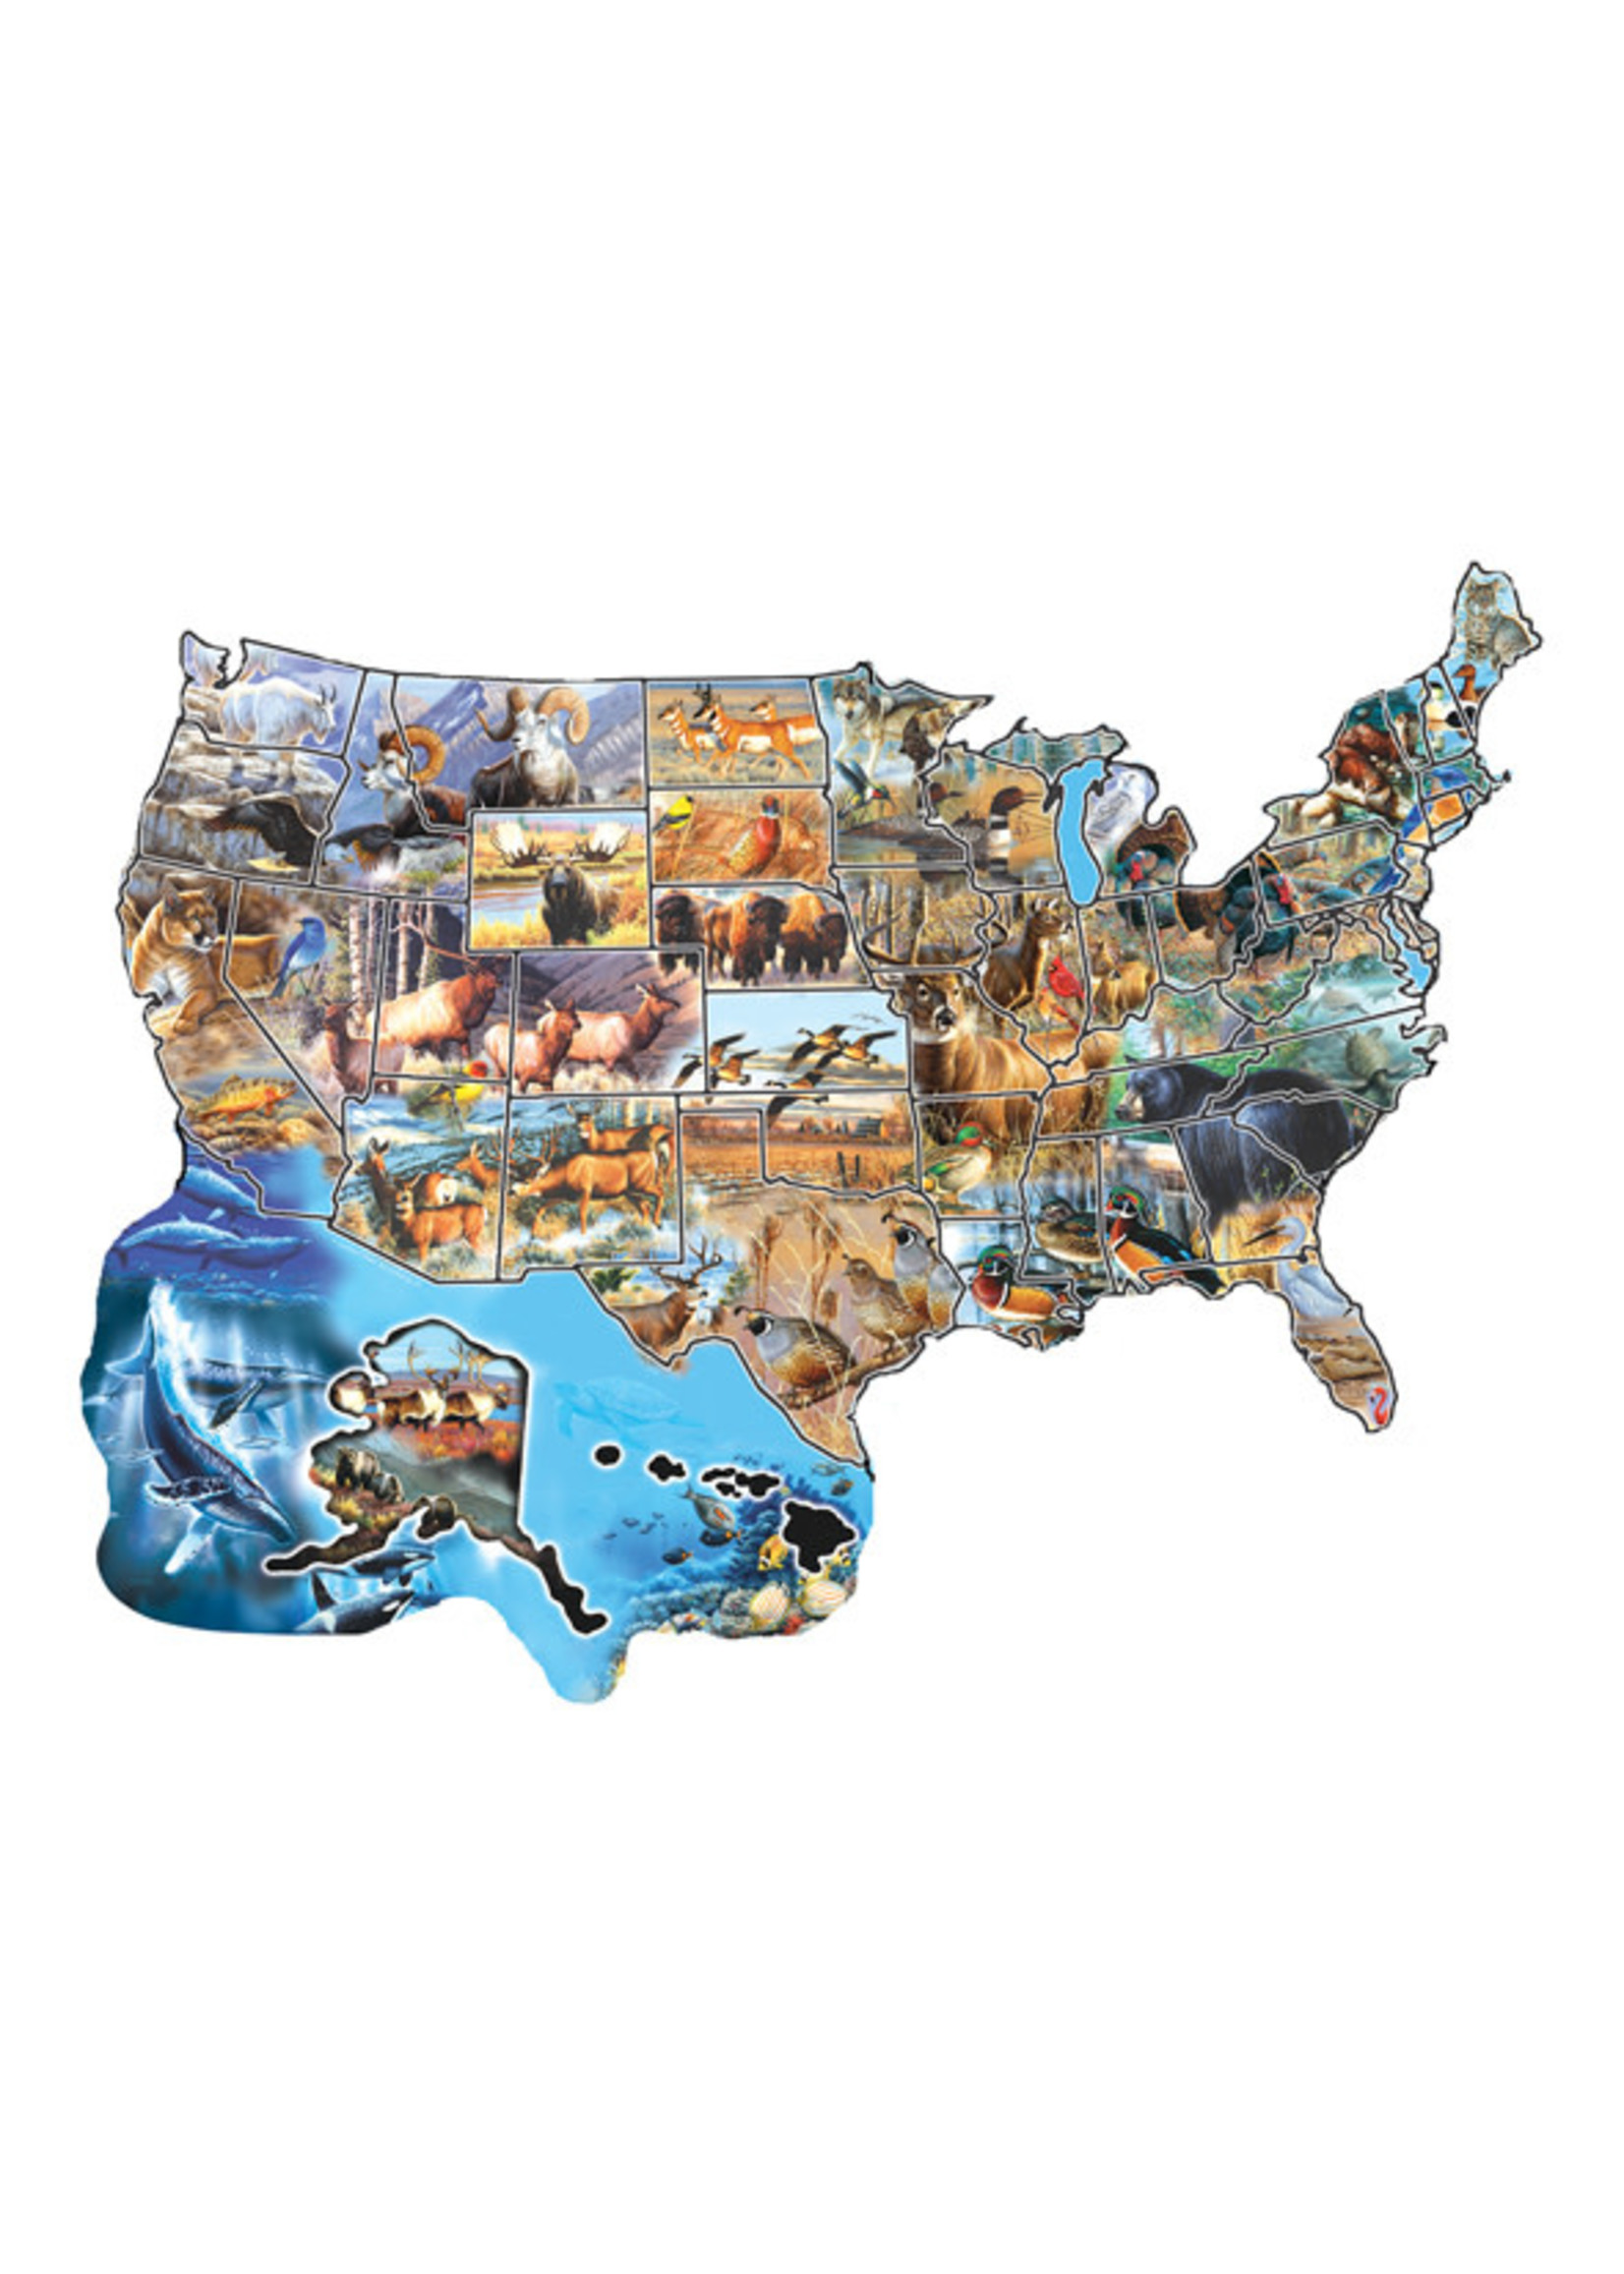 Sunsout Wild America Special Shaped Puzzle 1000 Pieces